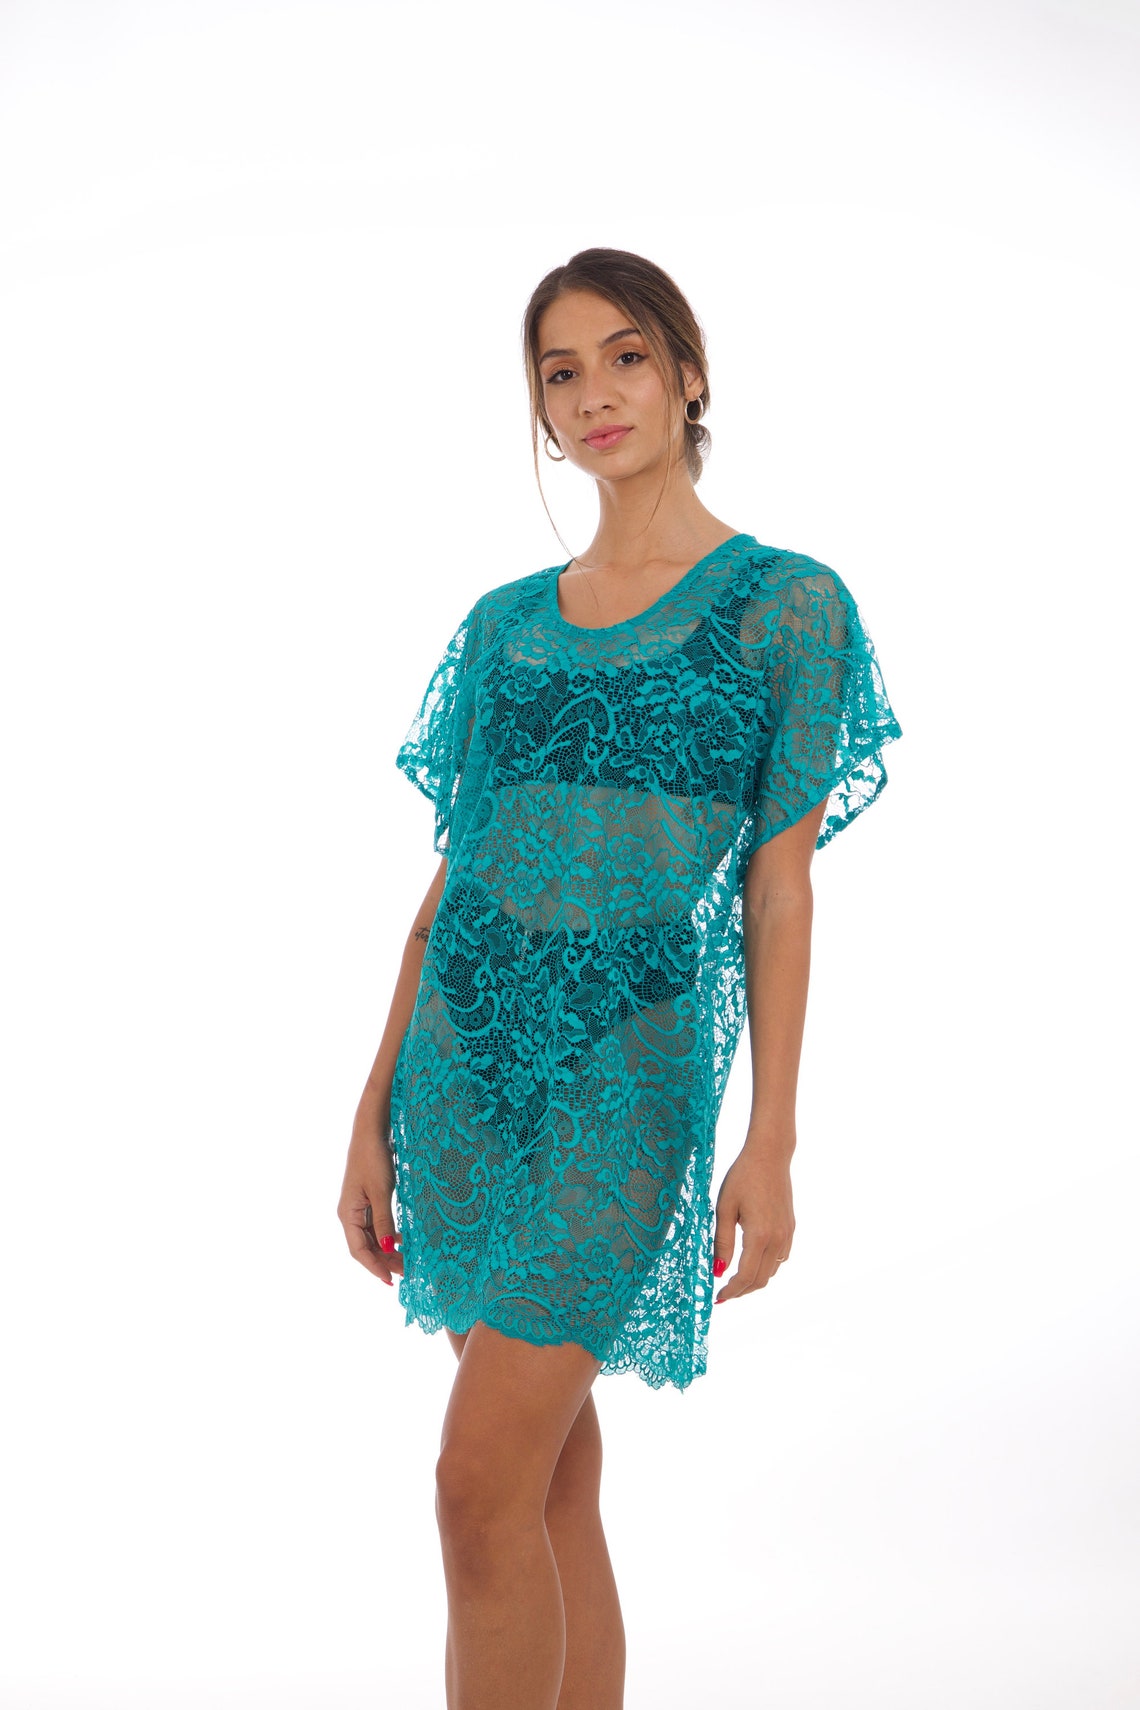 Turquoise Lace Dress Beach Cover Up Sheer Lace Tunic Etsy